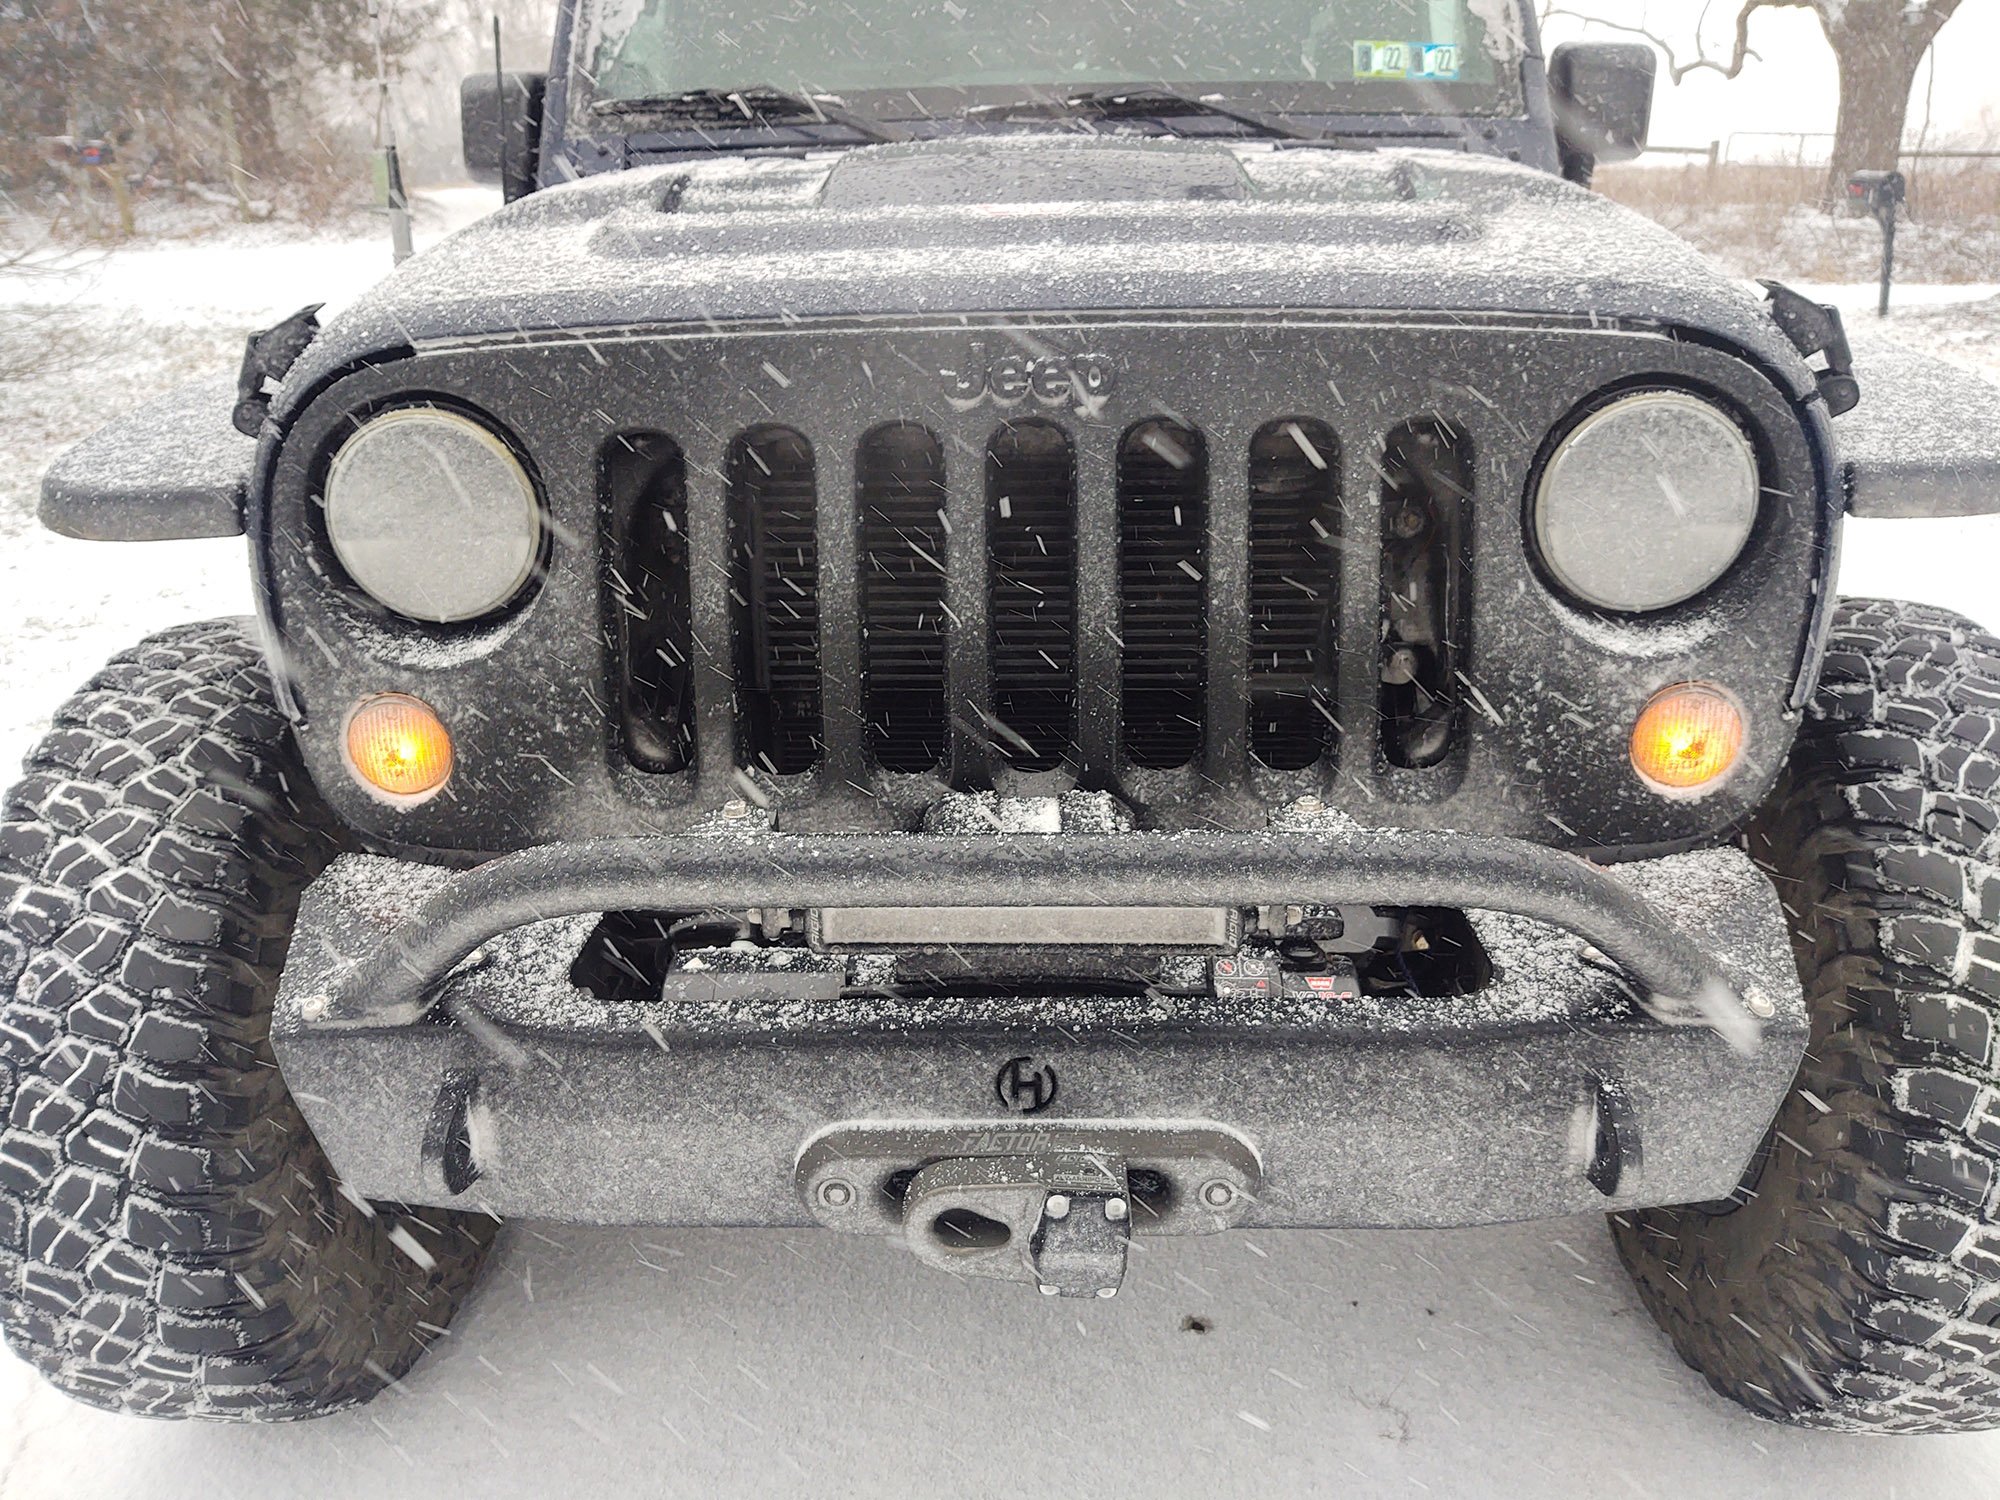 How To Upgrade Your Jeep For Winter Recovery Duty | Quadratec